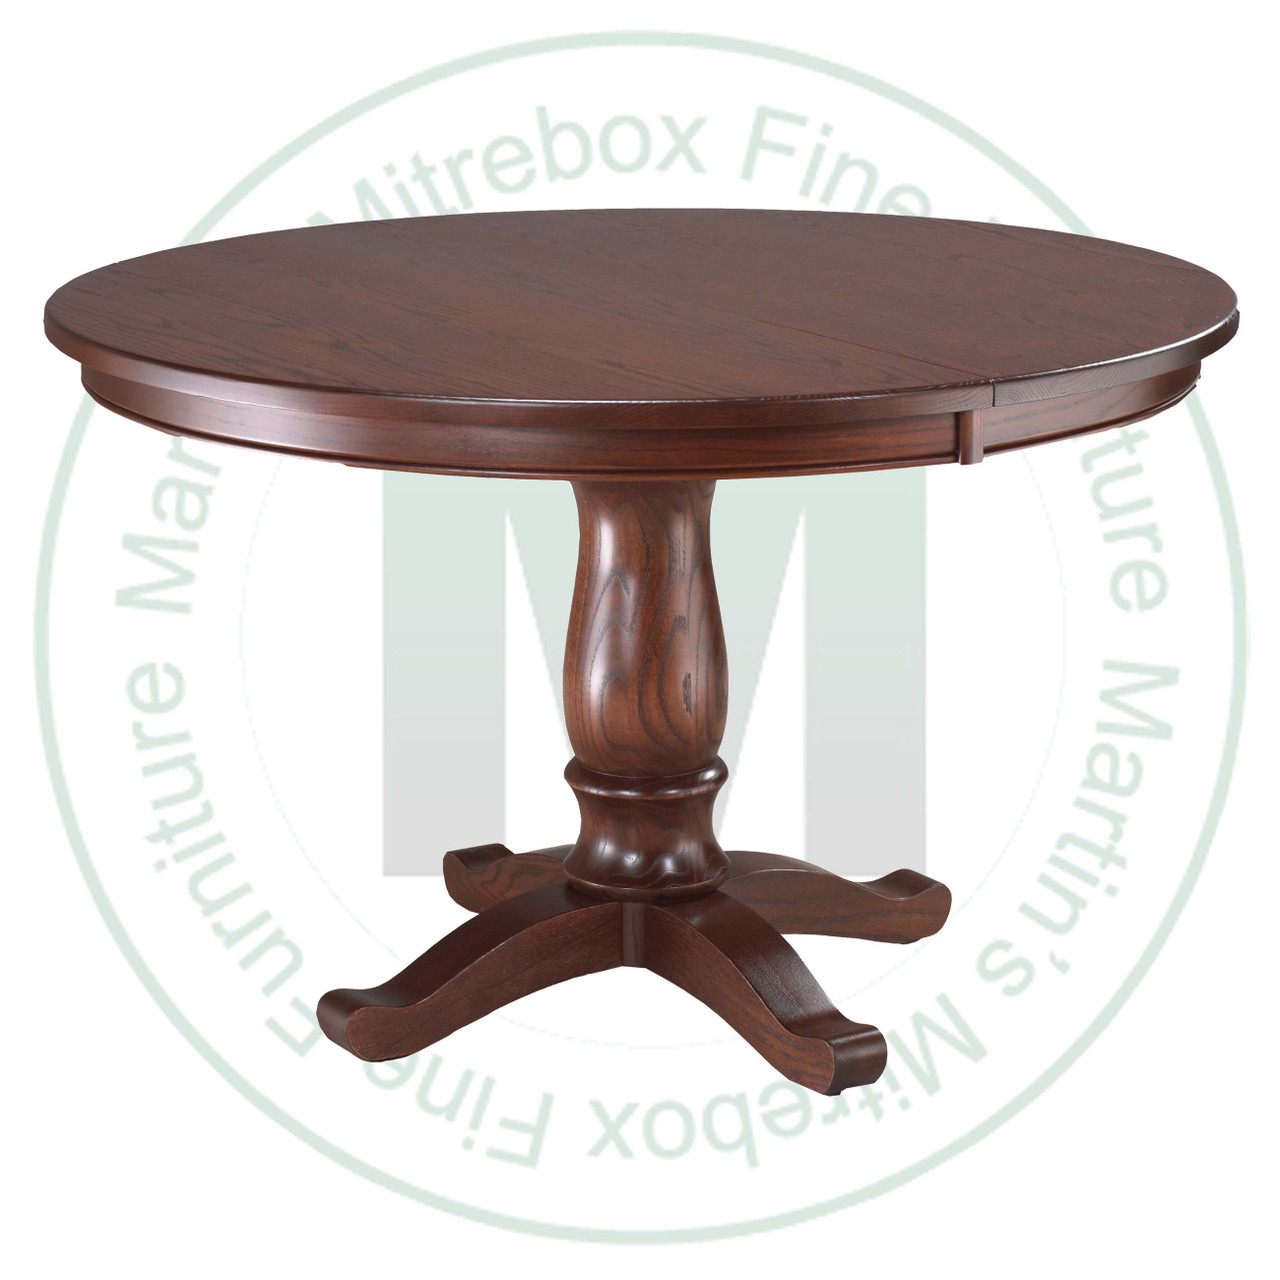 Maple Kimberly Crest Single Pedestal Table 36''D x 42''W x 30''H With 1 - 12'' Leaf Table